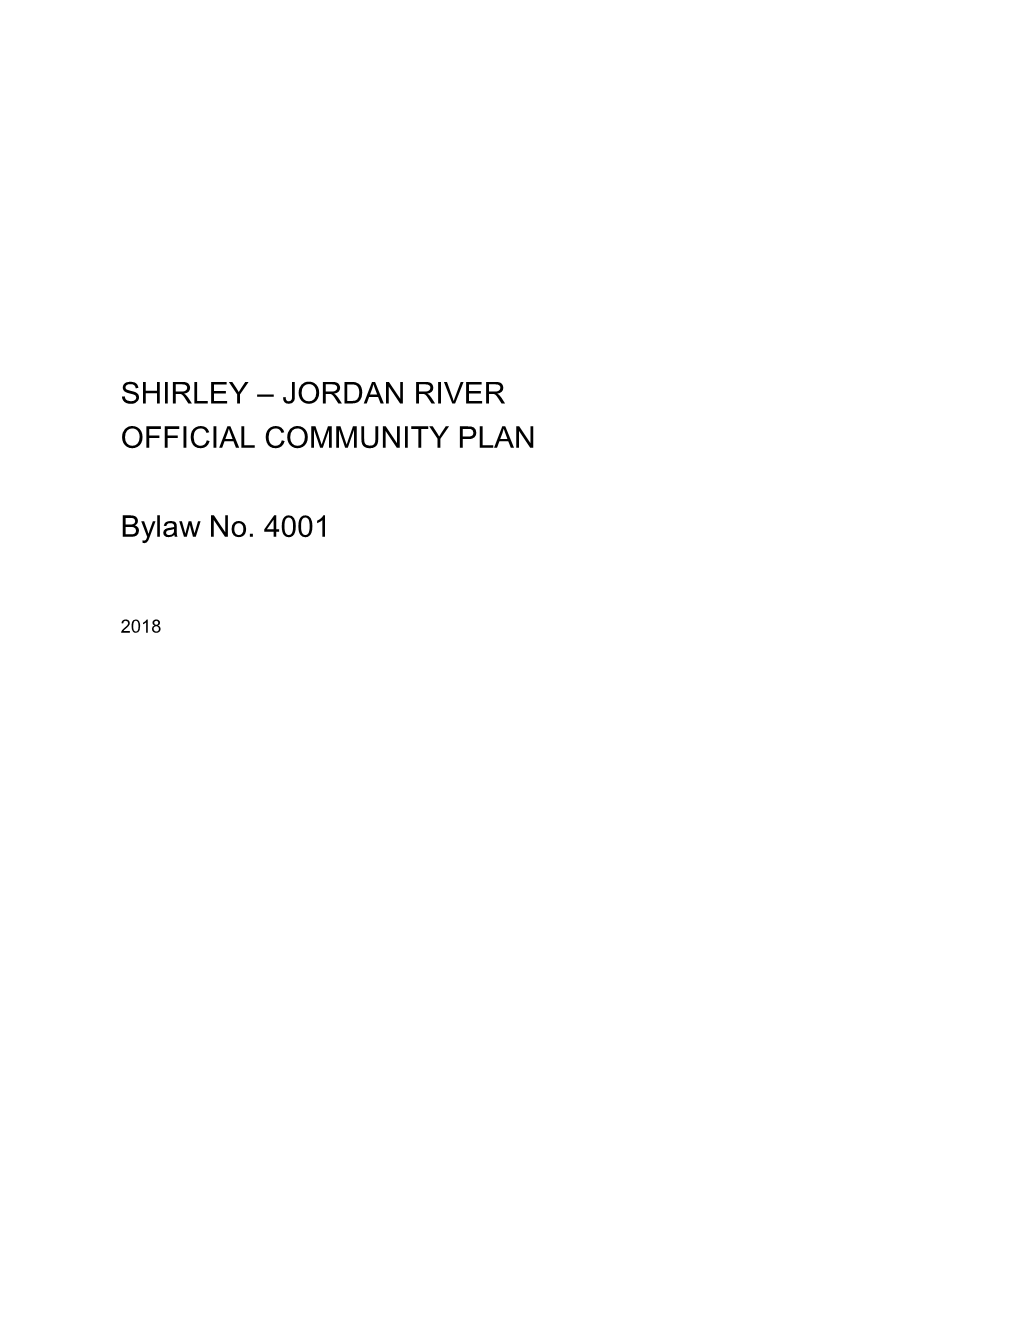 JORDAN RIVER OFFICIAL COMMUNITY PLAN BYLAW No. 4001 SCHEDULE a TABLE of CONTENTS